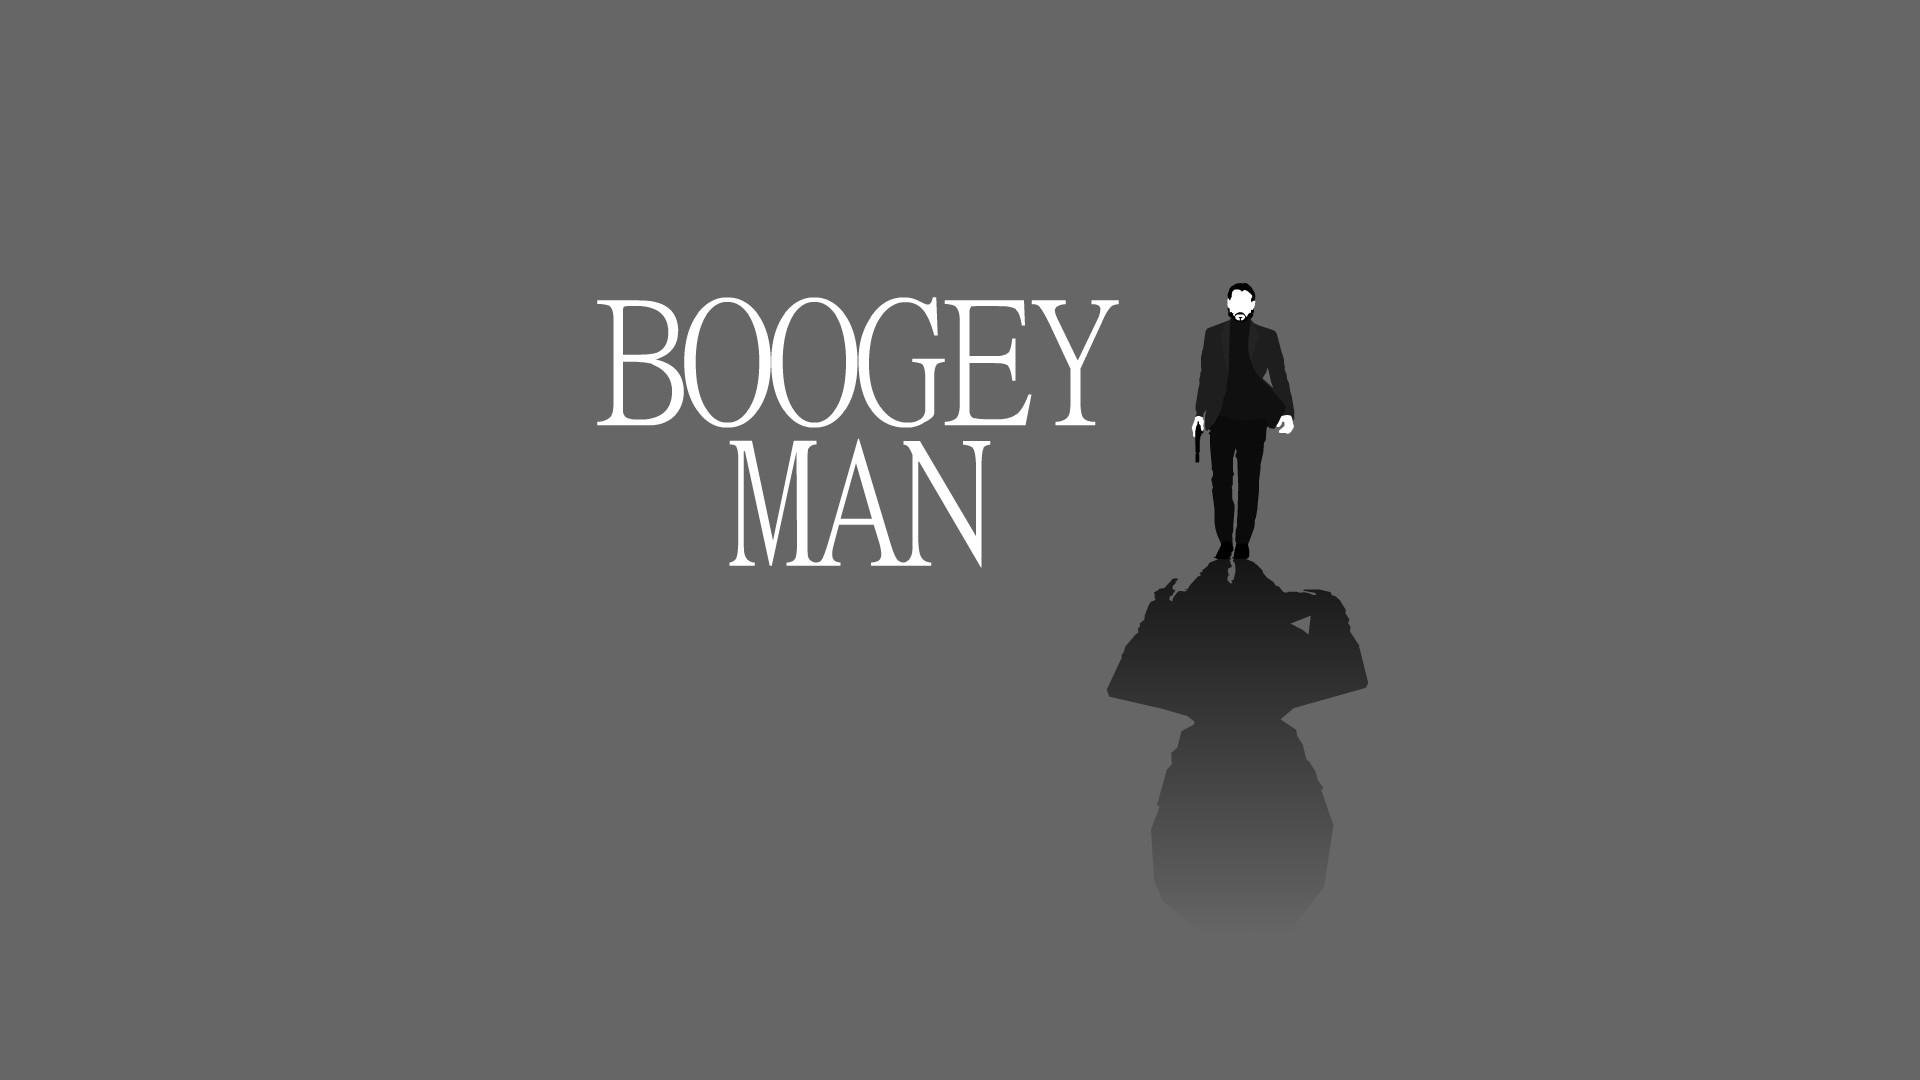 John Wick is the Boogie Man Wallpaper and Free